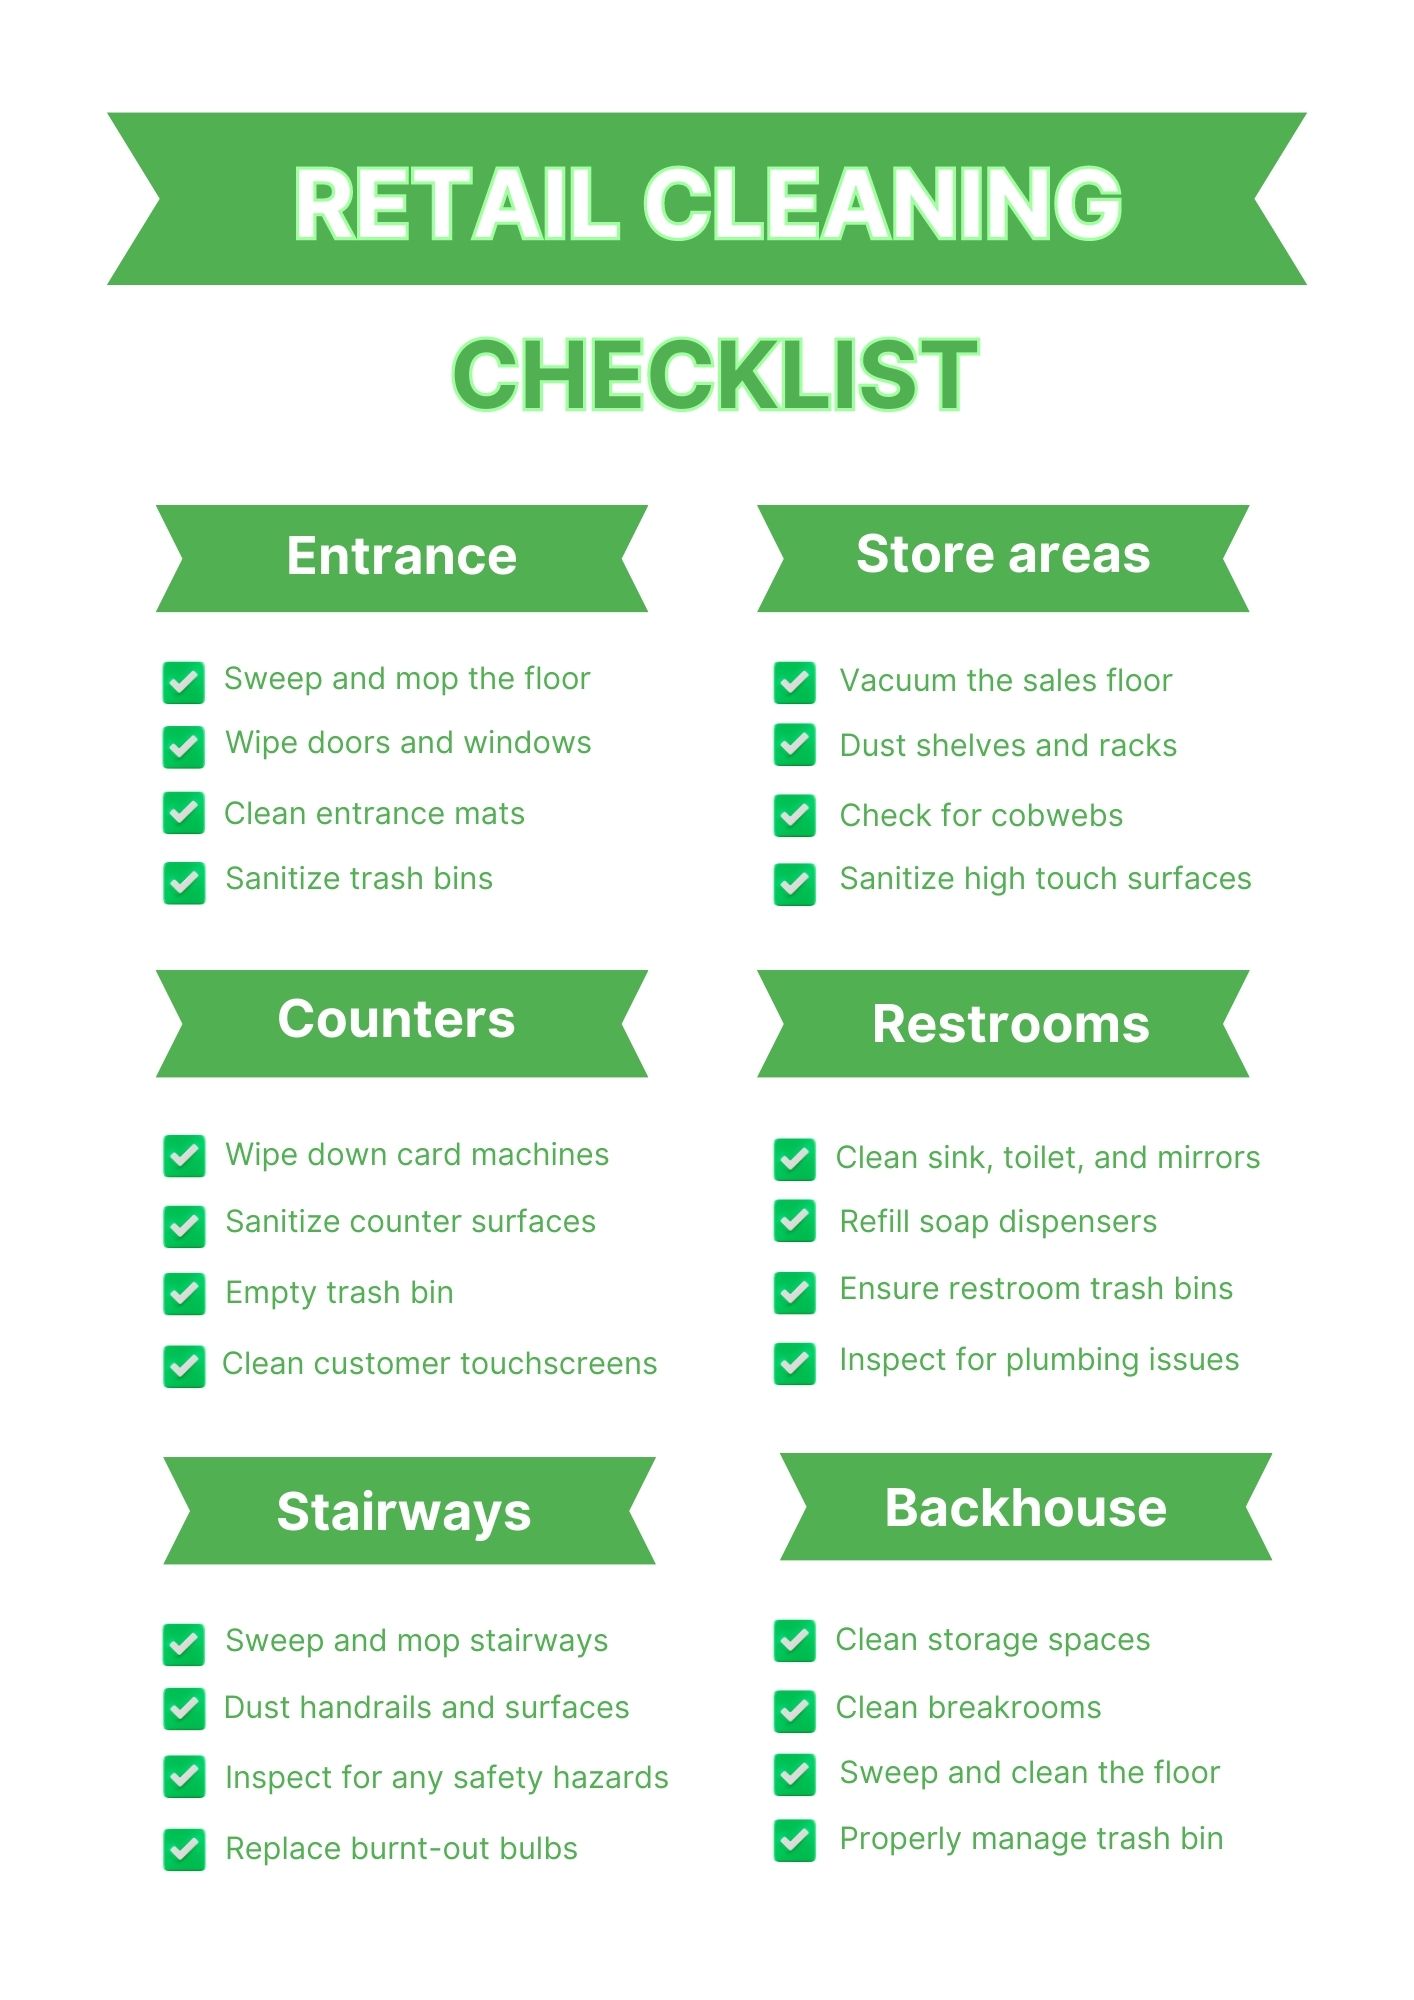 Retail cleaning schedule